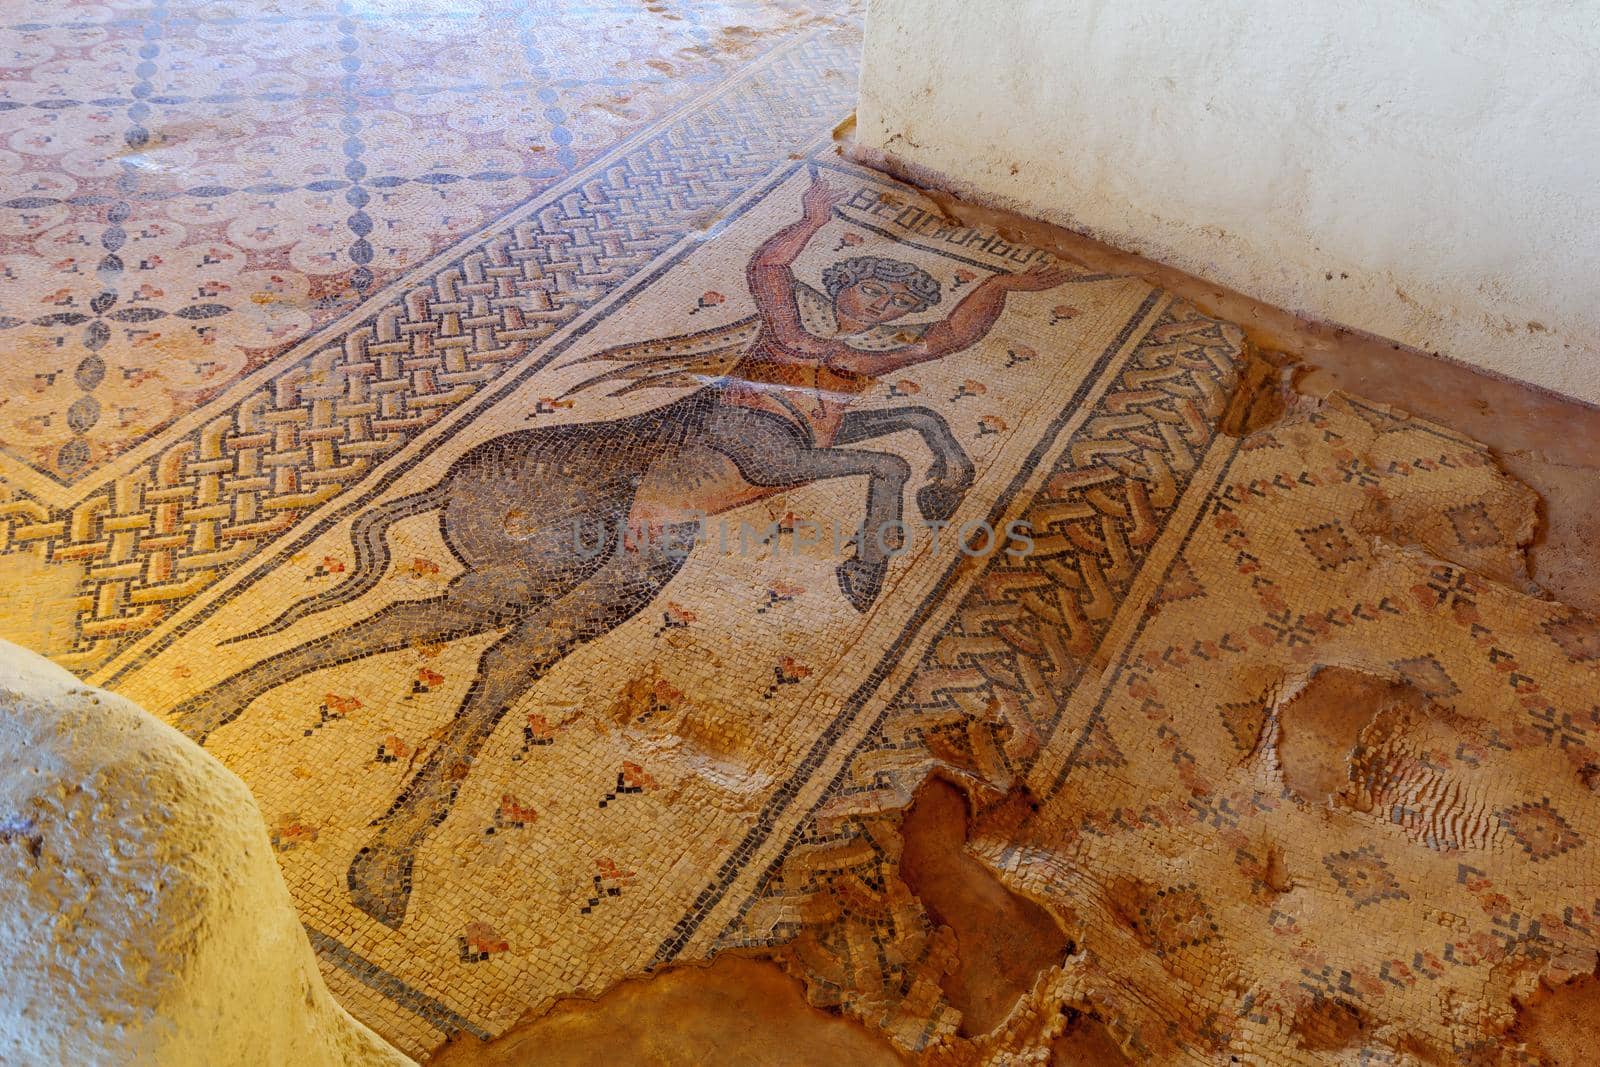 Tzipori, Israel - March 29, 2021: View of a Roman era mosaic floor with a centaur figure, in the Nile house, Tzipori National Park, Northern Israel